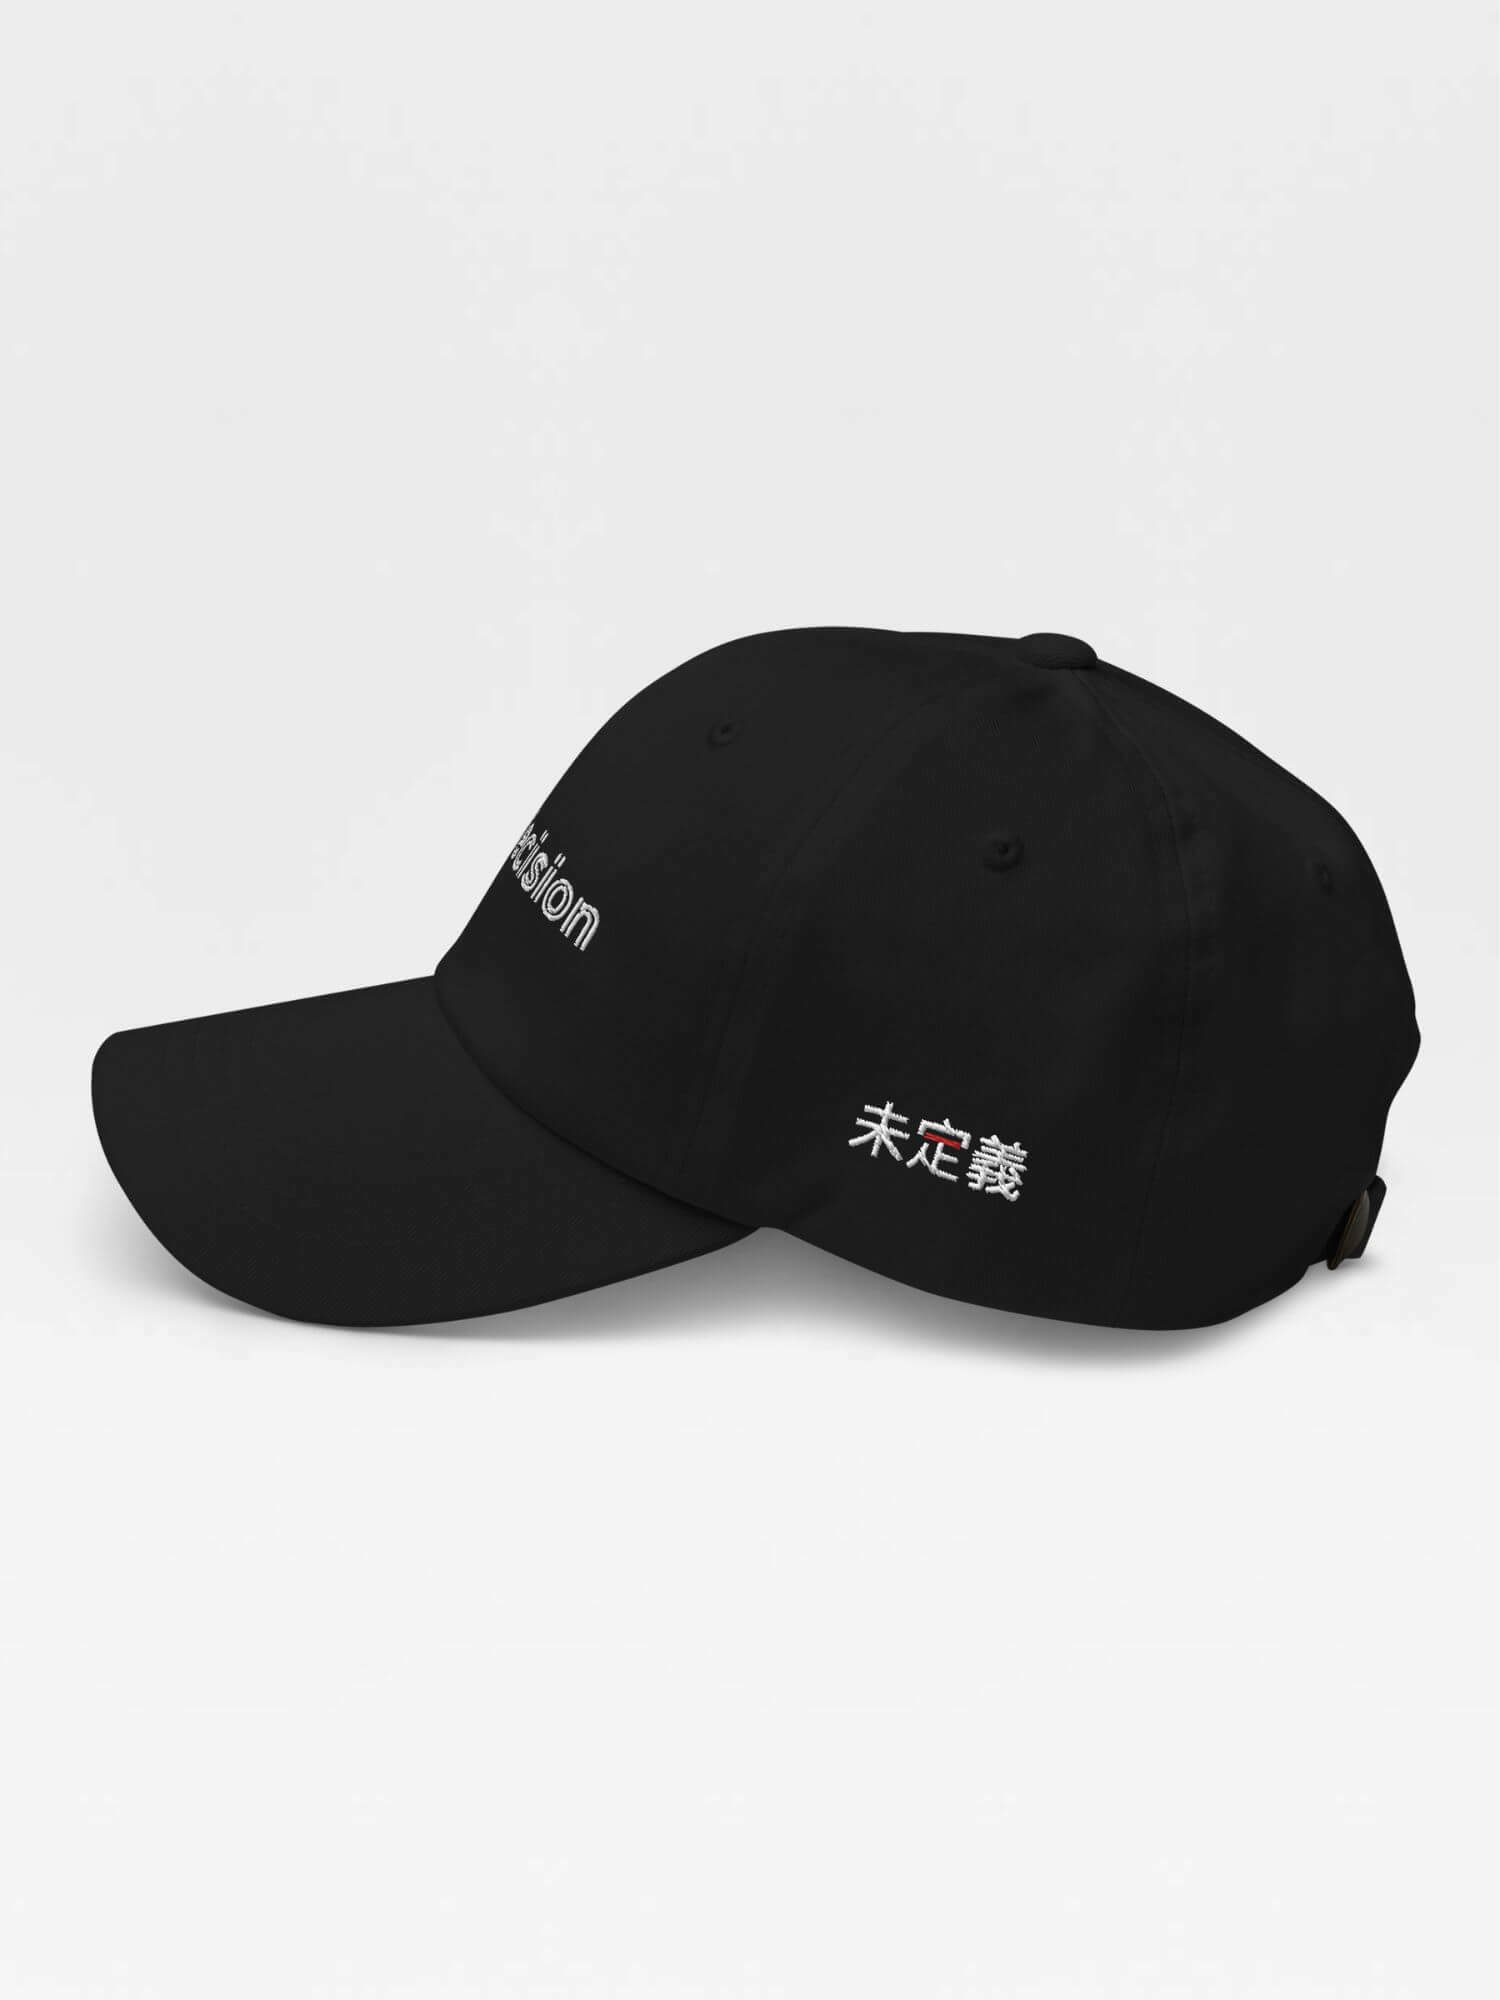 Dad Hat black   Women’s Men’s anywear Fitness Sports Activewear Indecision undefined by miteigi Branded product item gym yoga unisex indecisions baseball caps for woman man in black with platinum red letter Mens Womens headwear hats